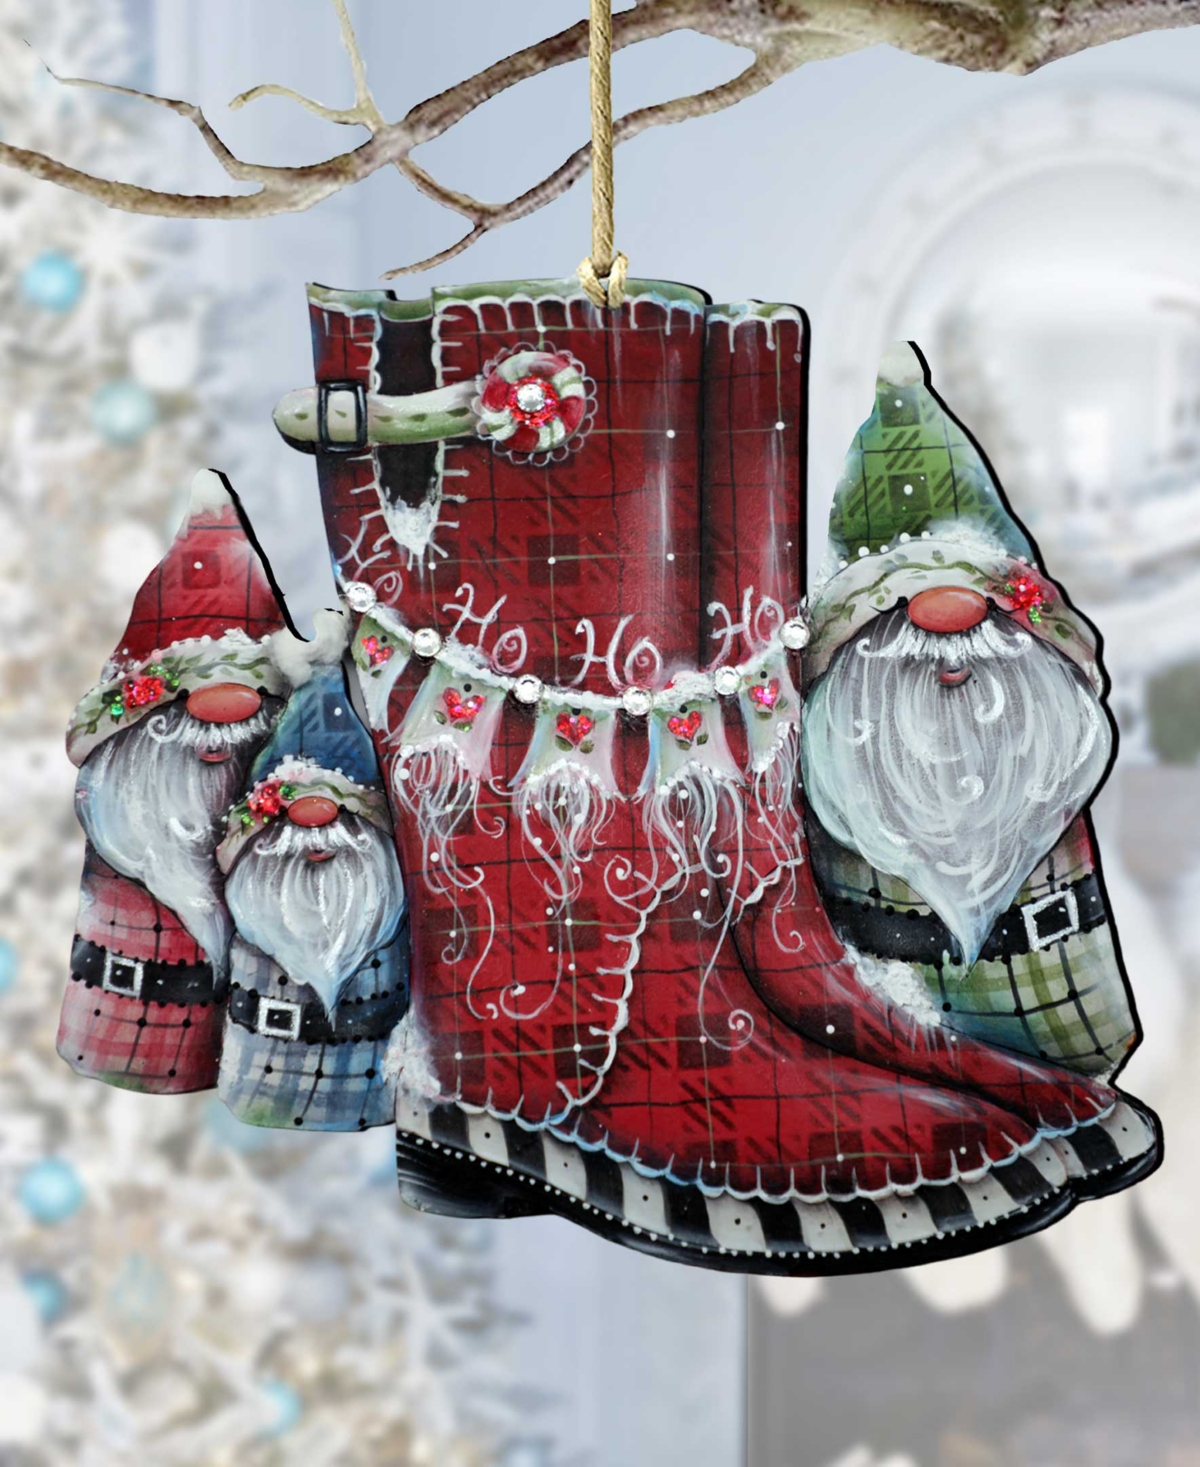 Designocracy Hello Christmas Boots Christmas Wooden Ornaments Holiday Decor J. Mills-price In Multi Color